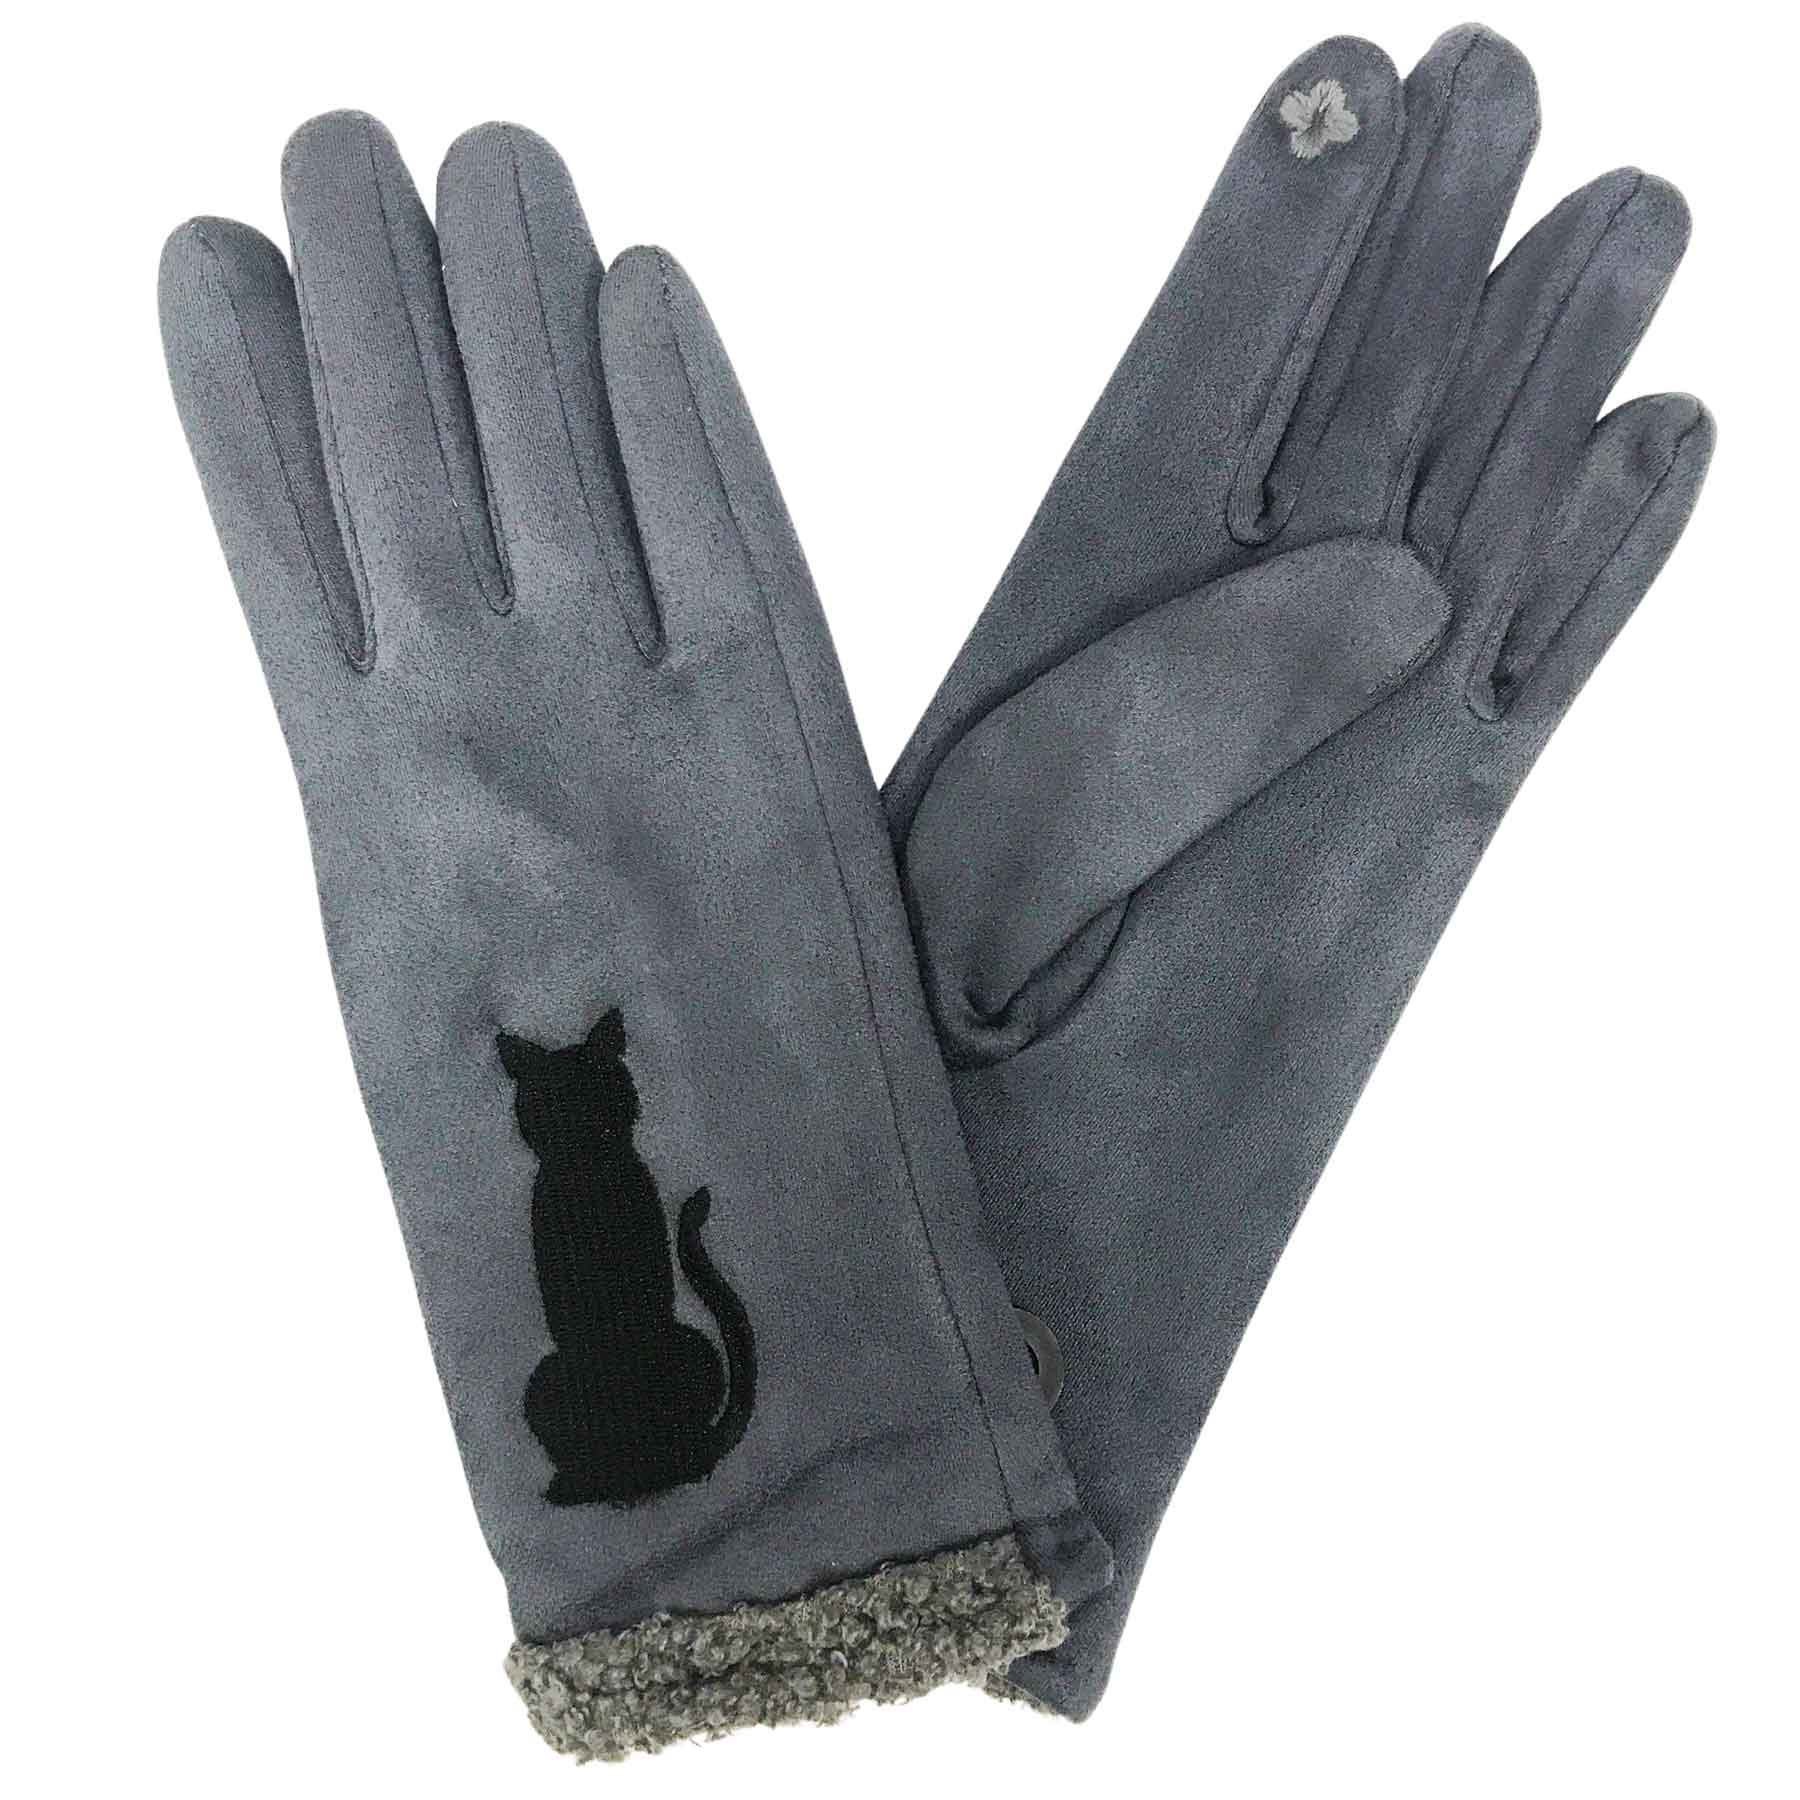 1229 - Grey Cat Silhouette <br>
Touch Screen Smart Gloves